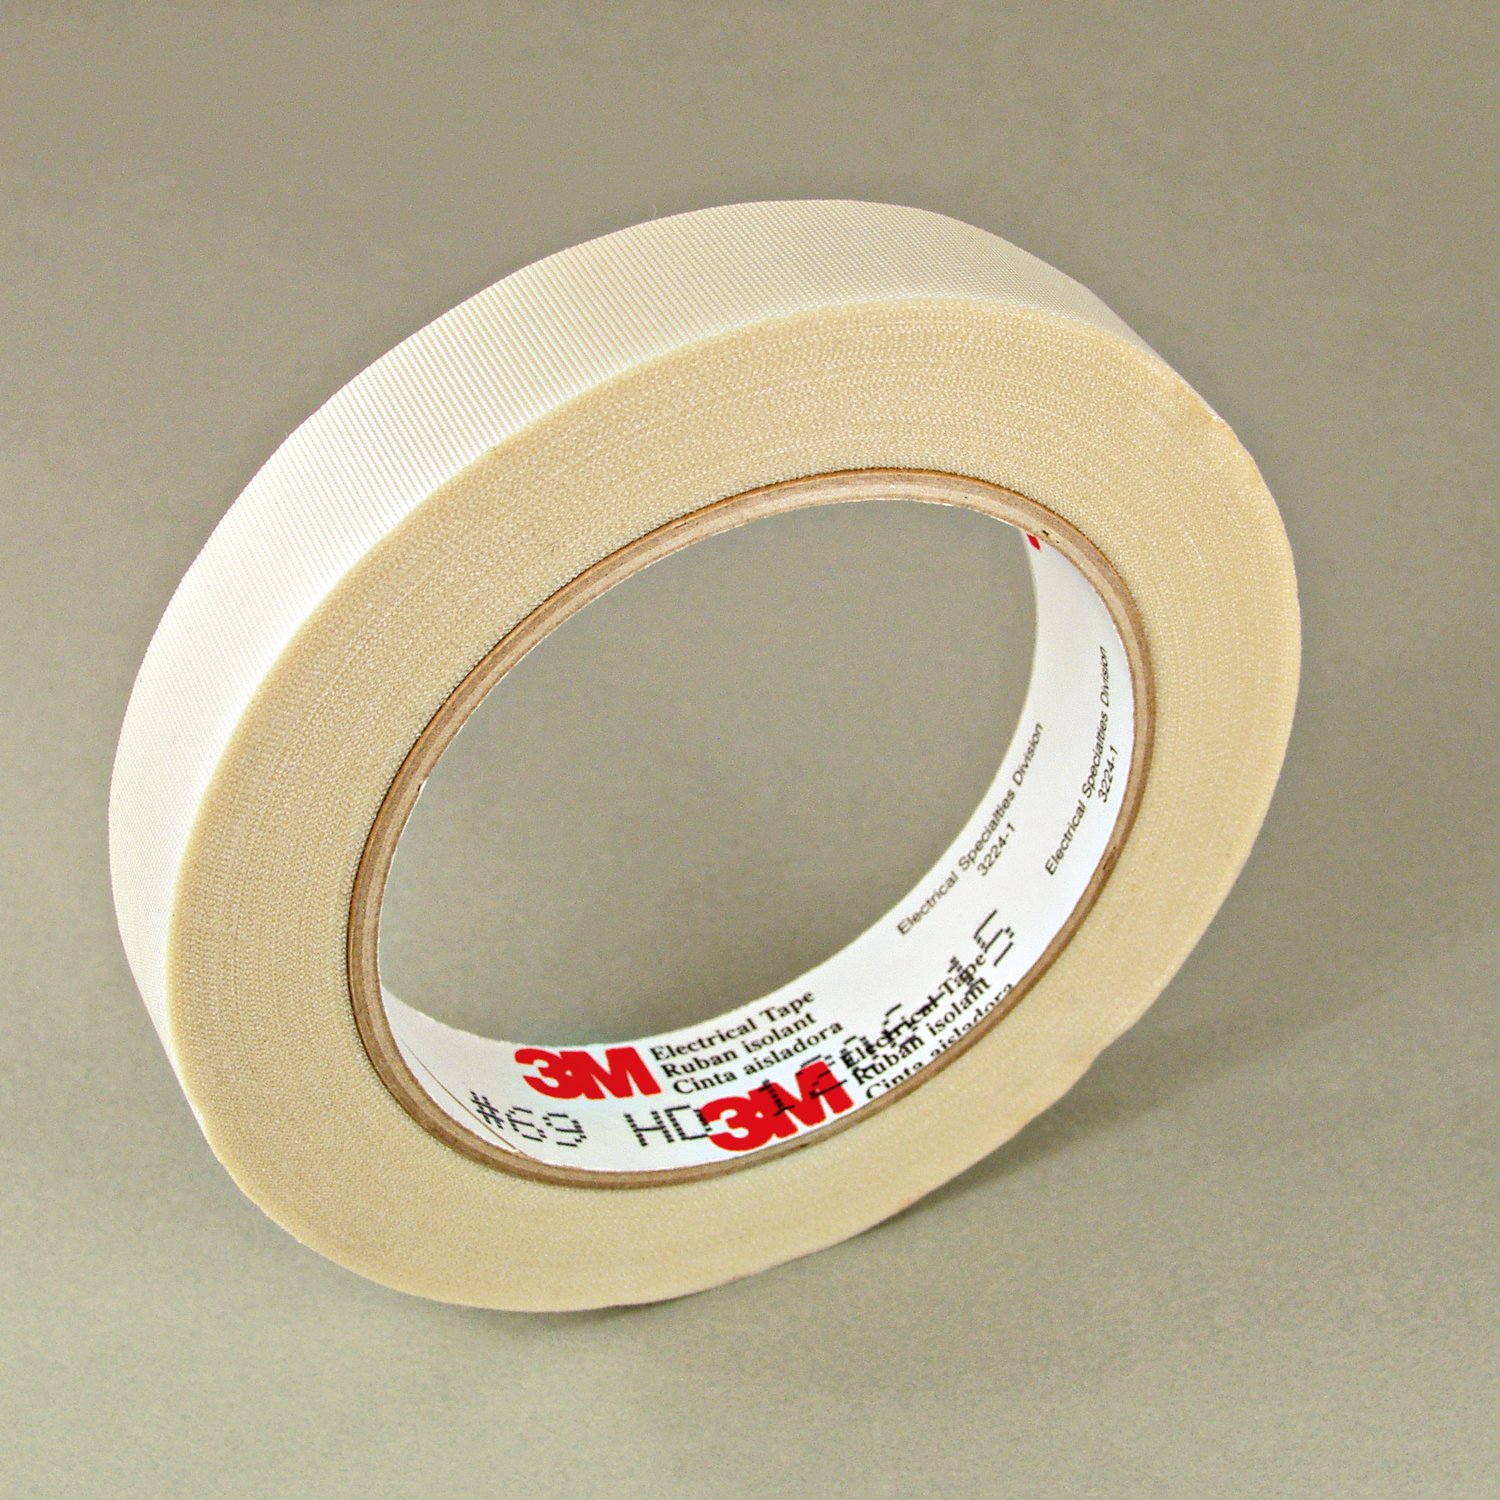 1-3/4" 3M 69 Glass Cloth Electrical Tape (3M69) with Silicone Adhesive 180°C, white, 1-3/4" wide x  36 YD roll